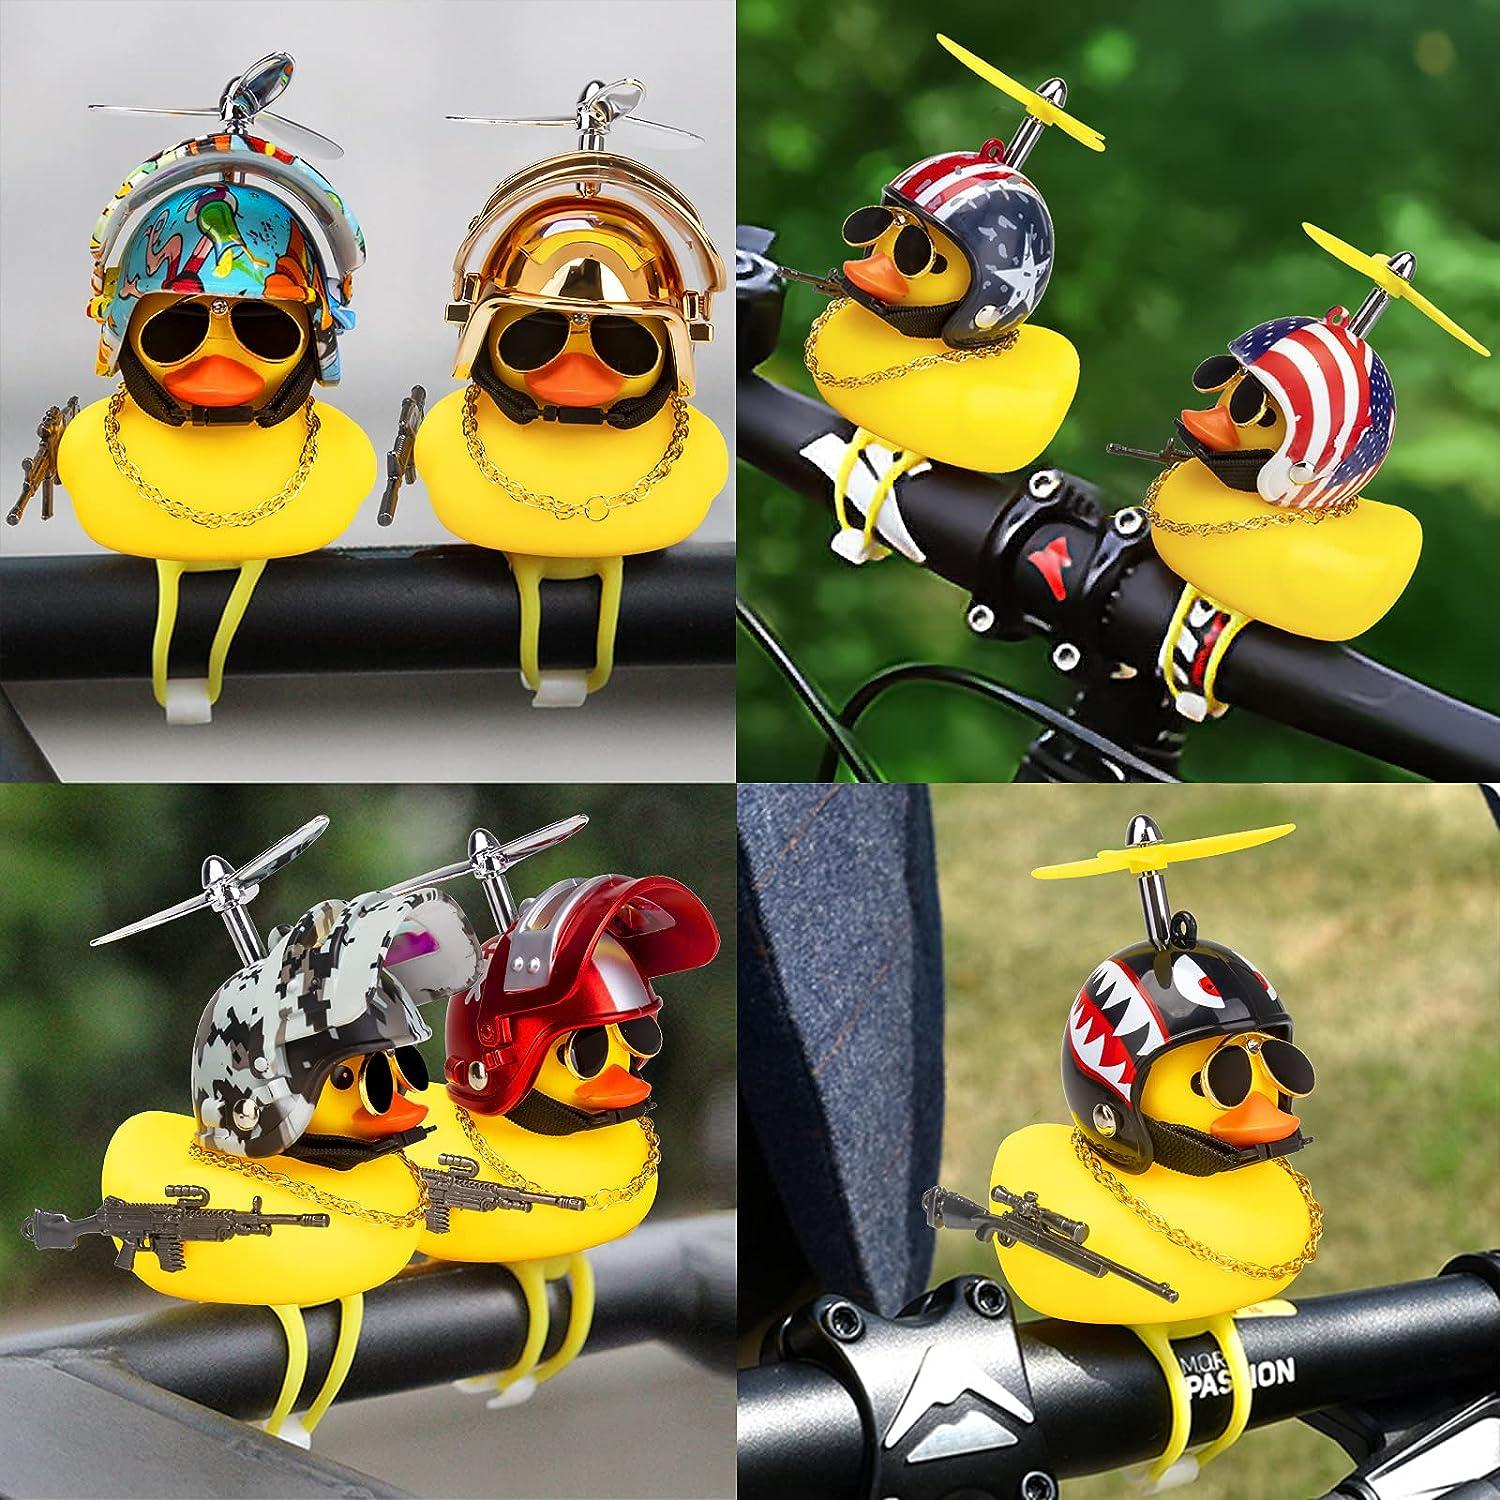 Decoration Duck In The Car With Helmet Ornament Duckling In The Car Cycling  Internior Accessories Auto Dashboard Duck Toys - Ornaments - AliExpress